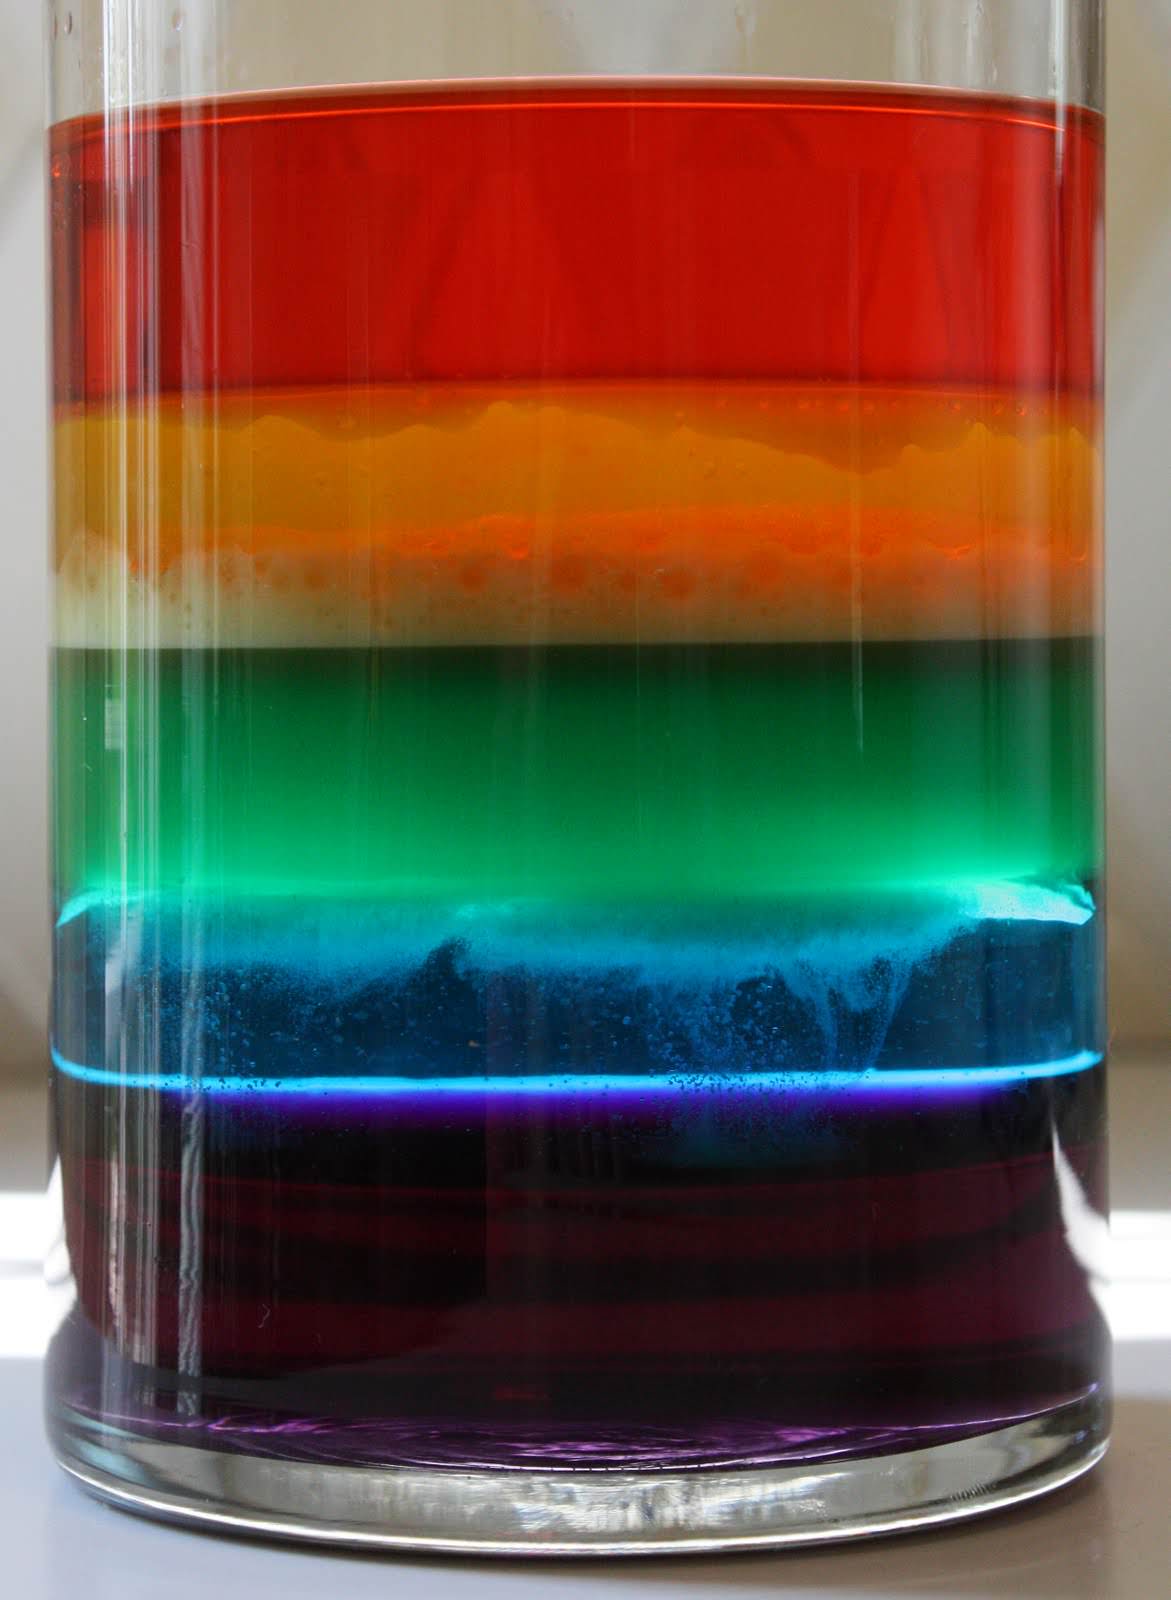 A Rainbow in a Jar is a Lesson in Density